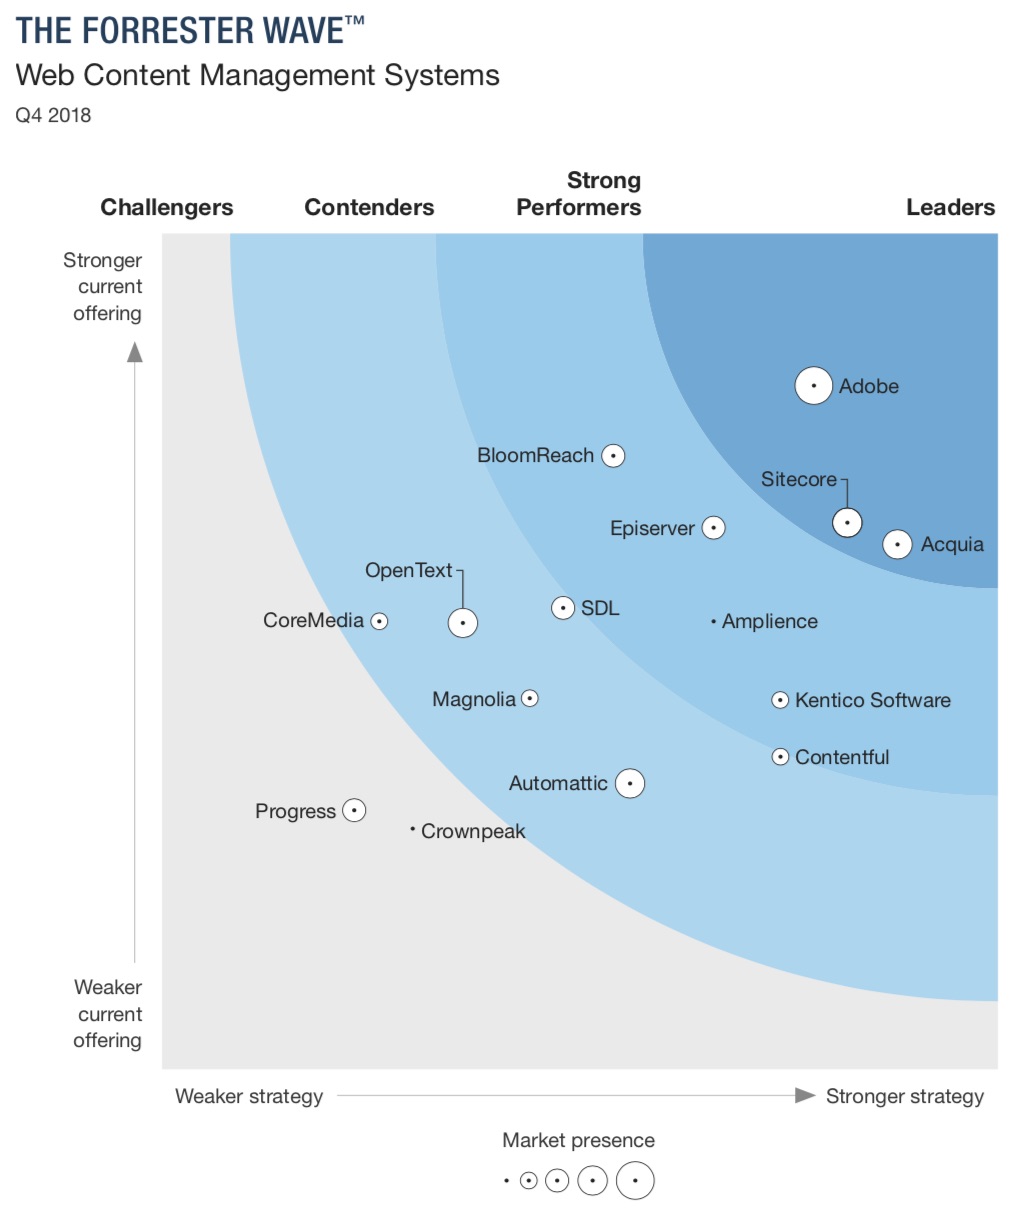 Acquia shown as a Leader together with Adobe and Sitecore.